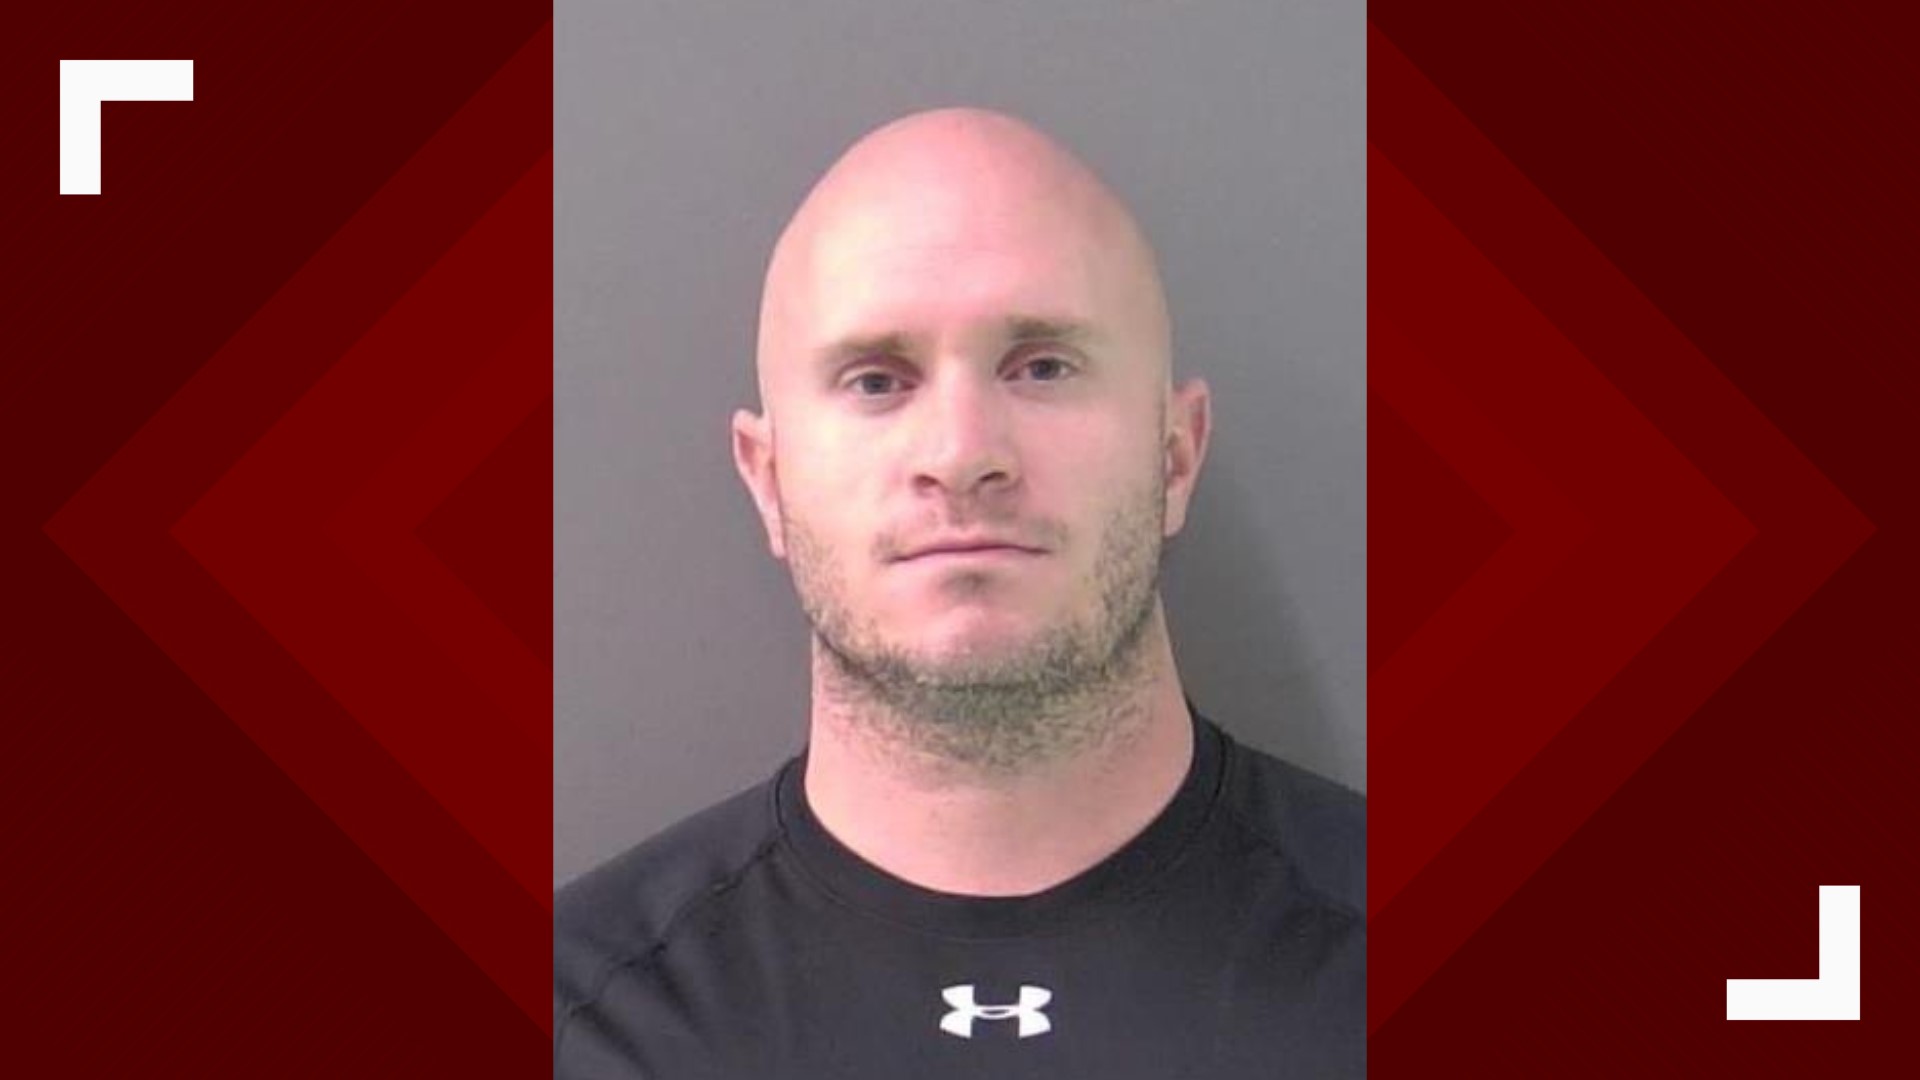 Anthony Custance is accused of firing rounds into the back of a home while serving a no-knock warrant. A Texas Rangers investigation showed he tampered with his rifle and ammunition.